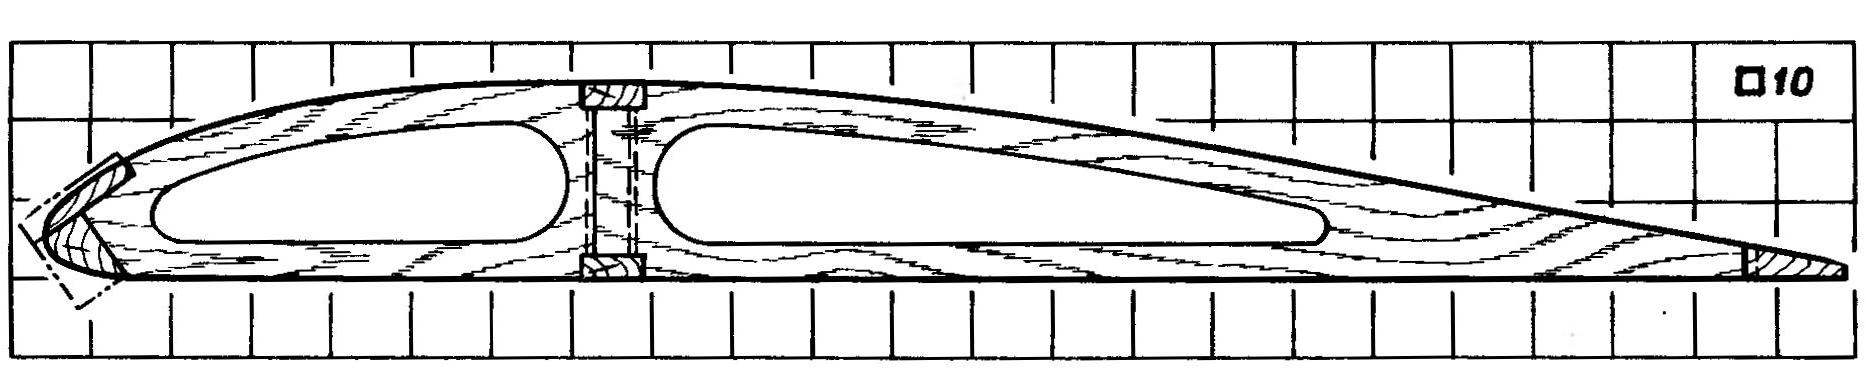 Profile of the wing and its structural elements